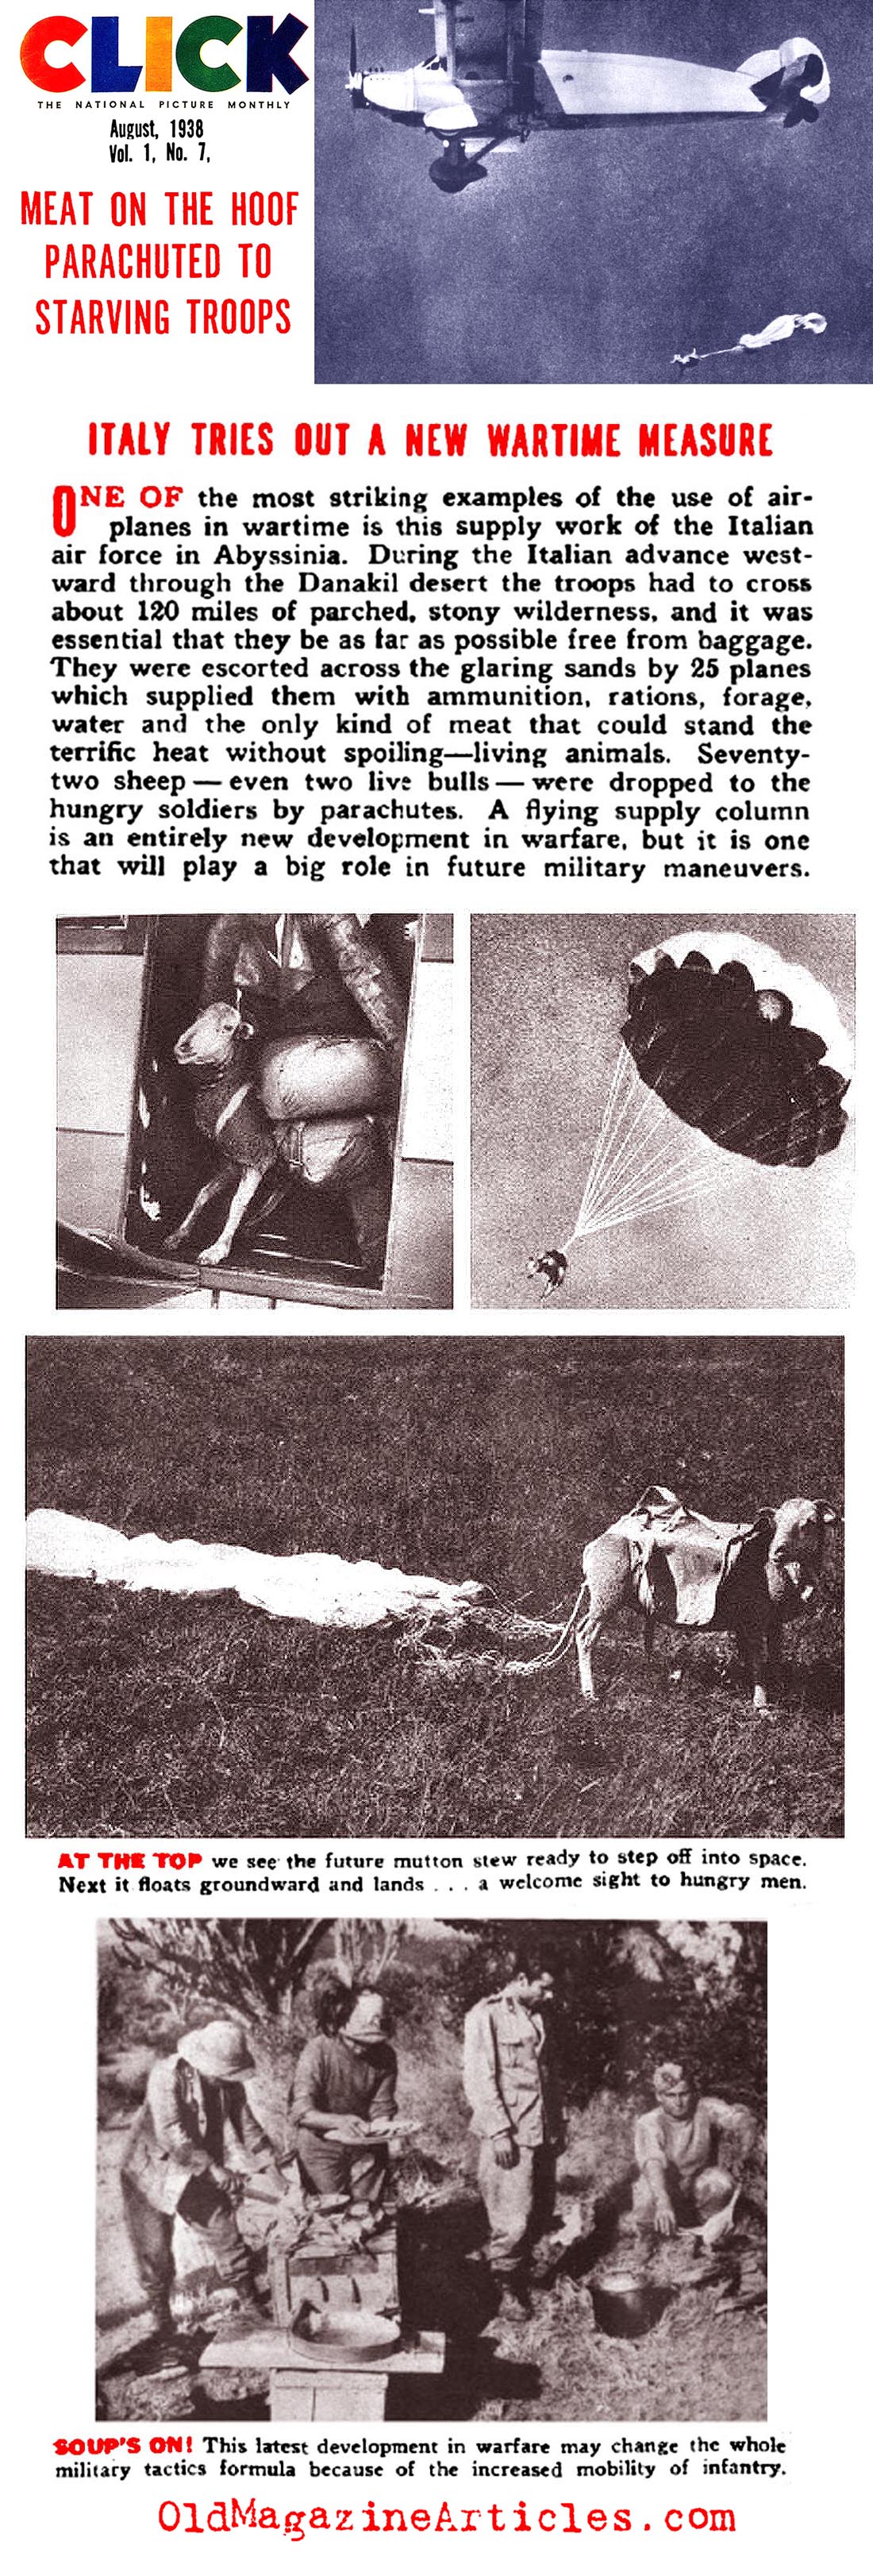 Fresh Meat Delivery System for Italian Troops (Click Magazine, 1938)